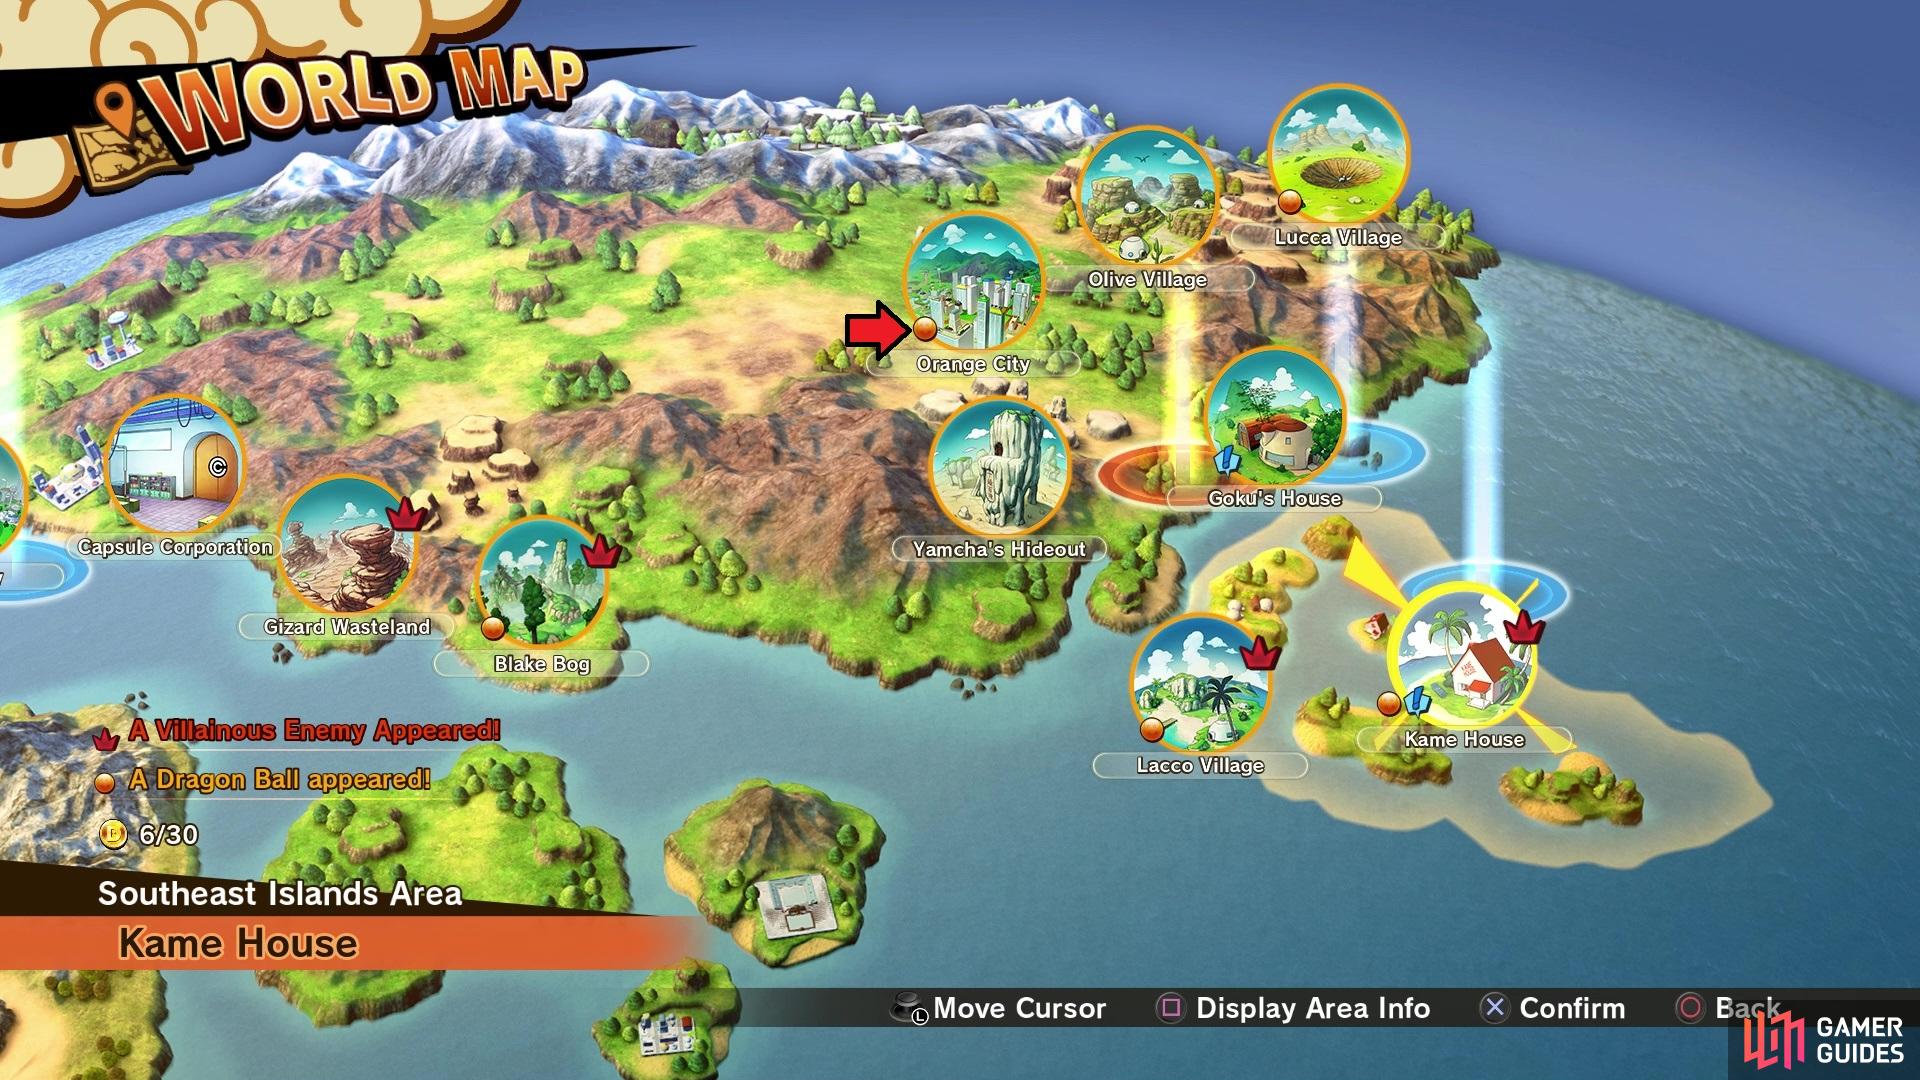 There is an icon on the world map when a Dragon Ball is present